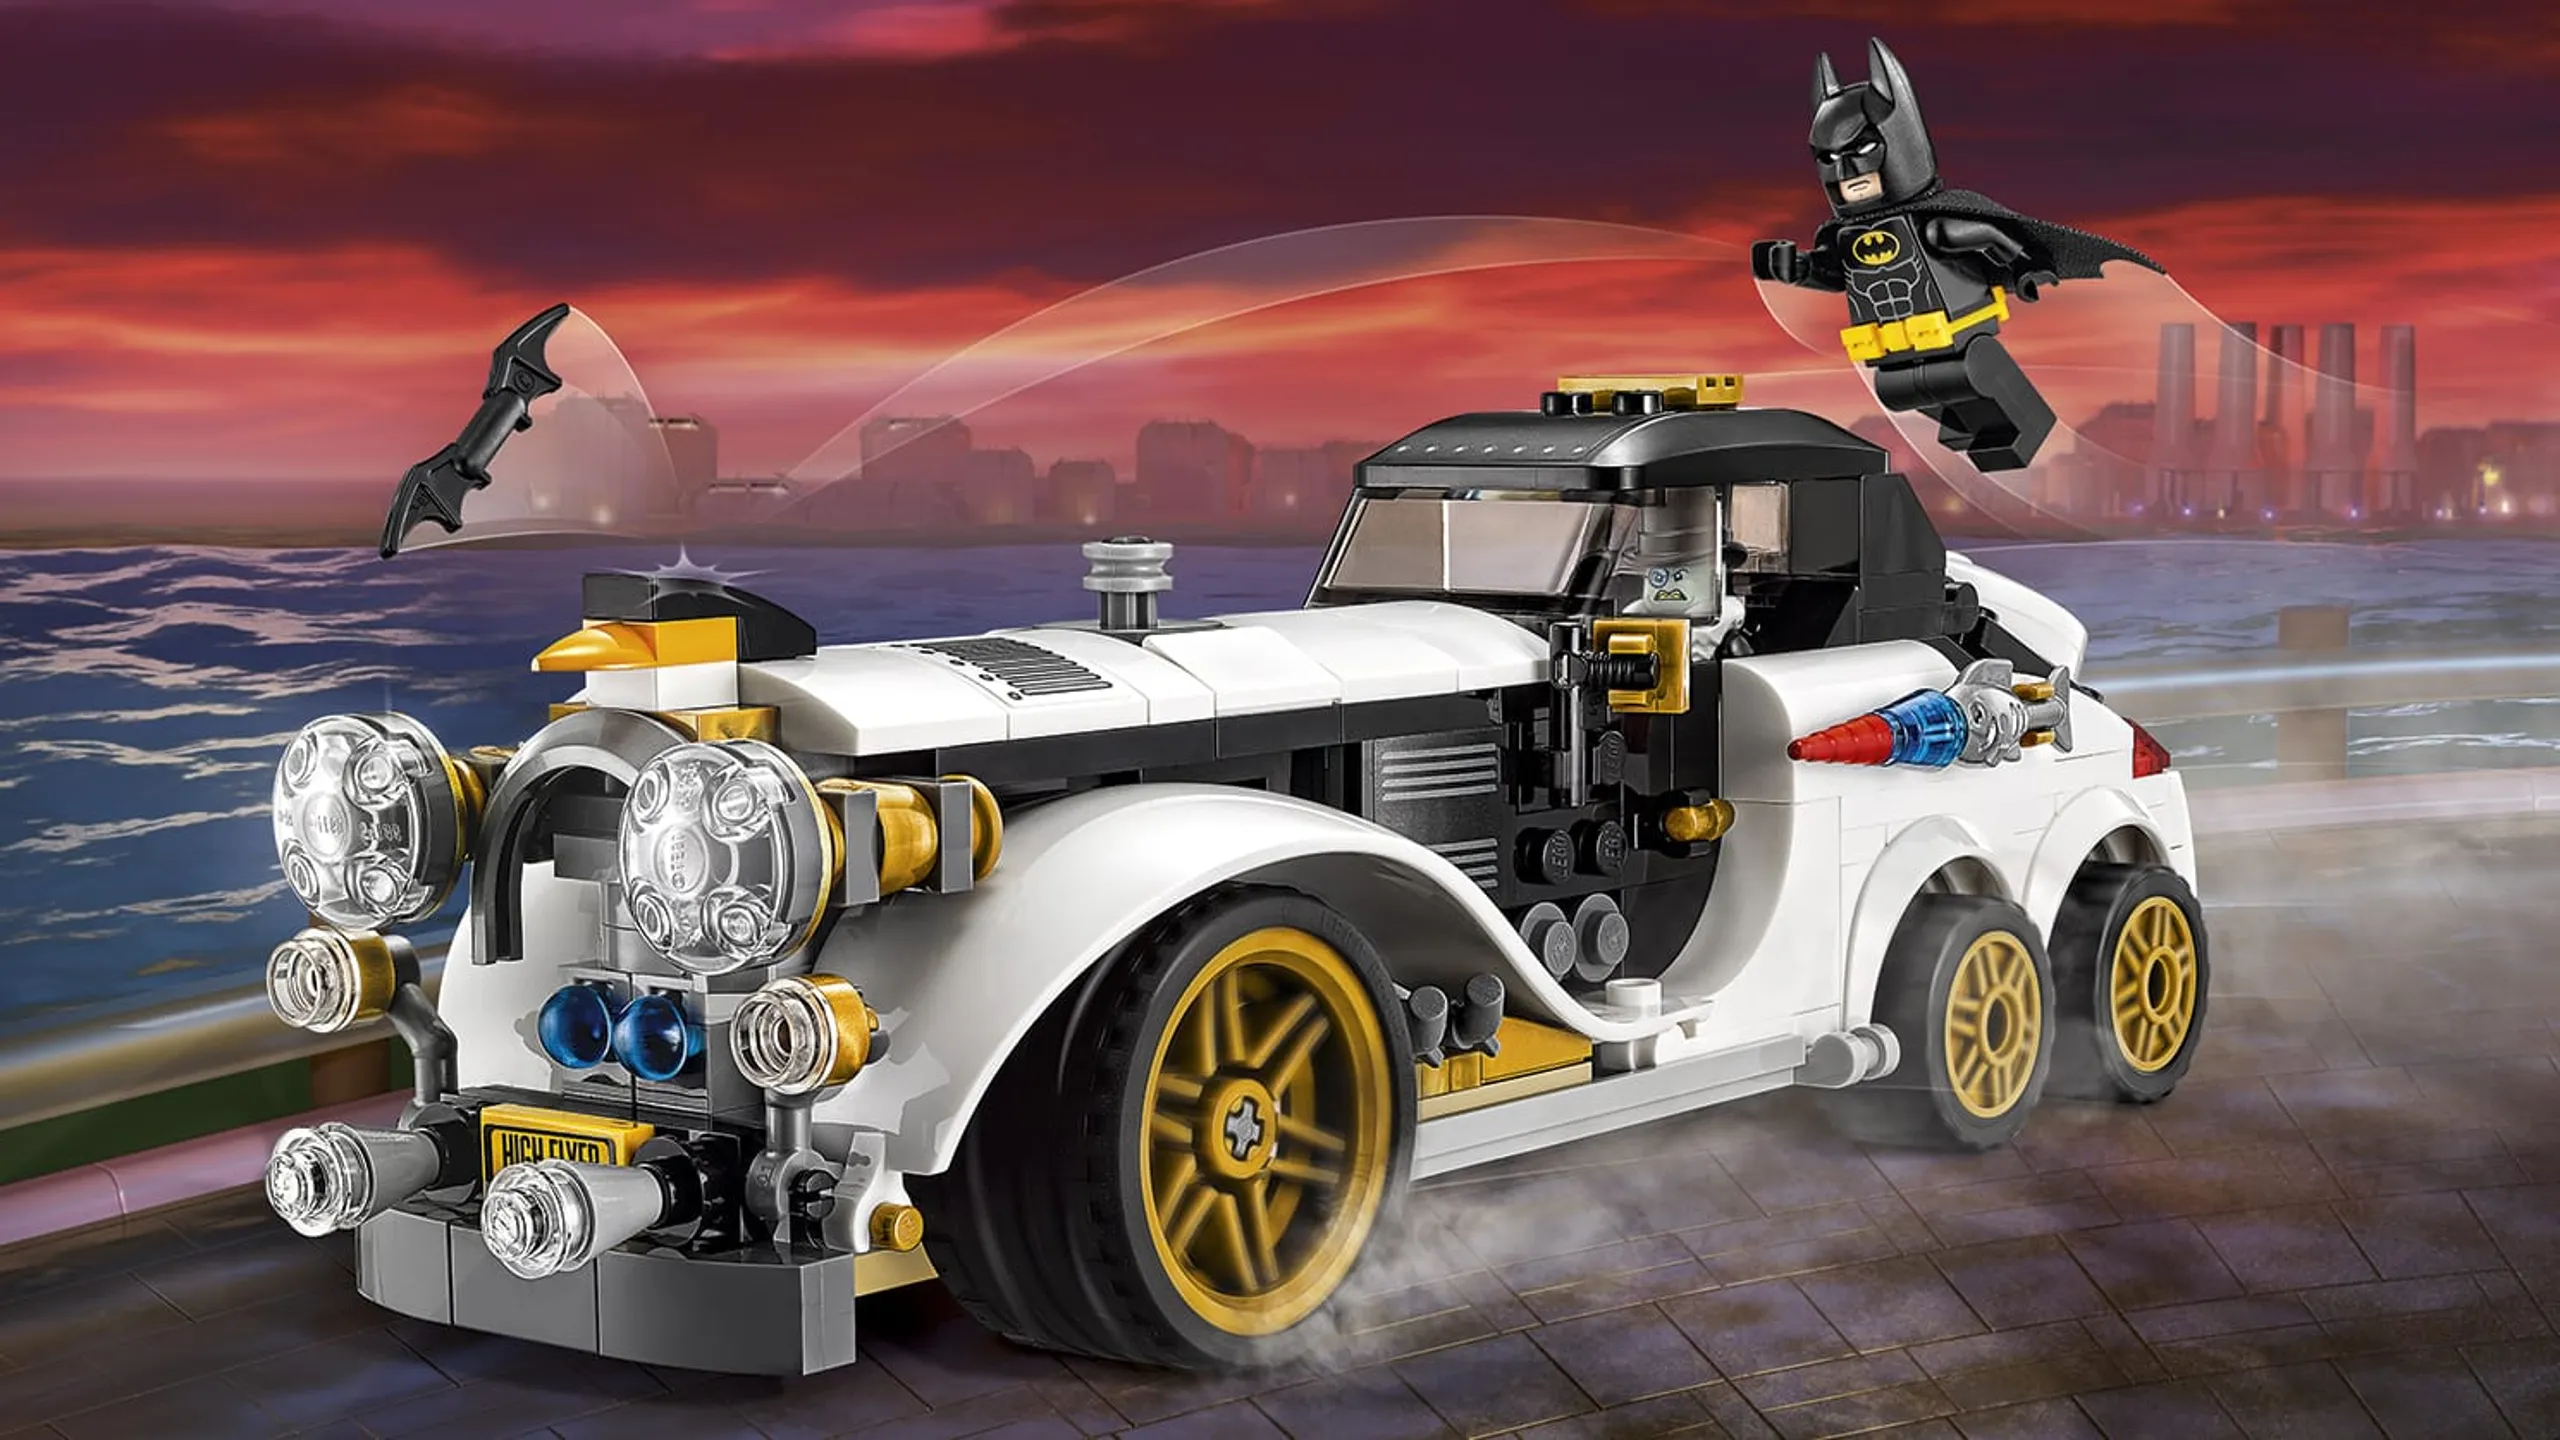 LEGO Batman Movie The Penguin Arctic Roller - 70911 - The Penguin drives around Gotham City and makes chaos with his missile loaded car so Batman has to stop him.